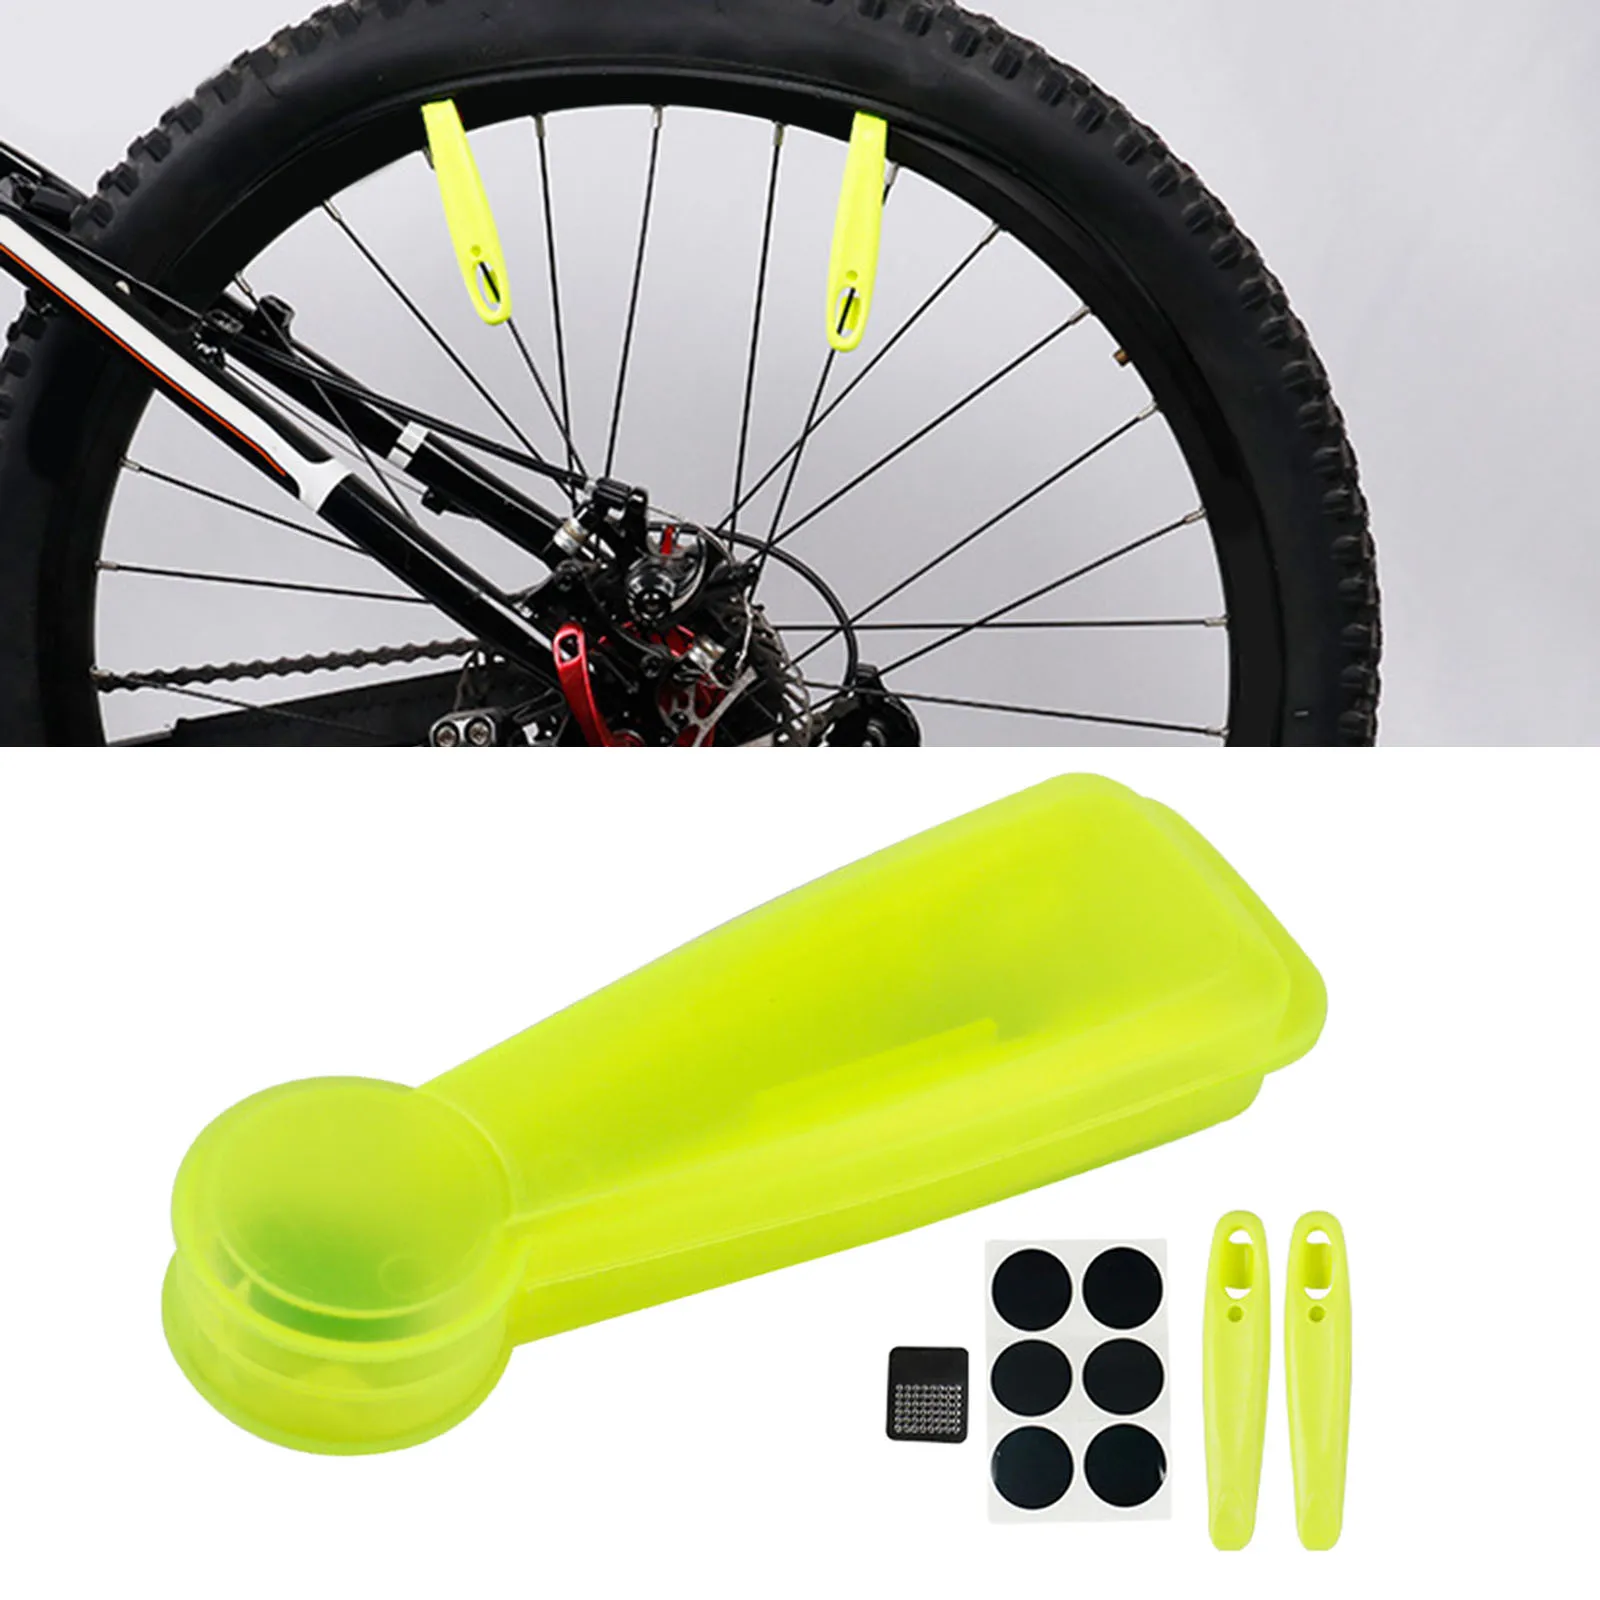 3Pcs Motorcycle Cycling Mountain Bike Bicycle XC Puncture Repair Tyre Lever Set. 